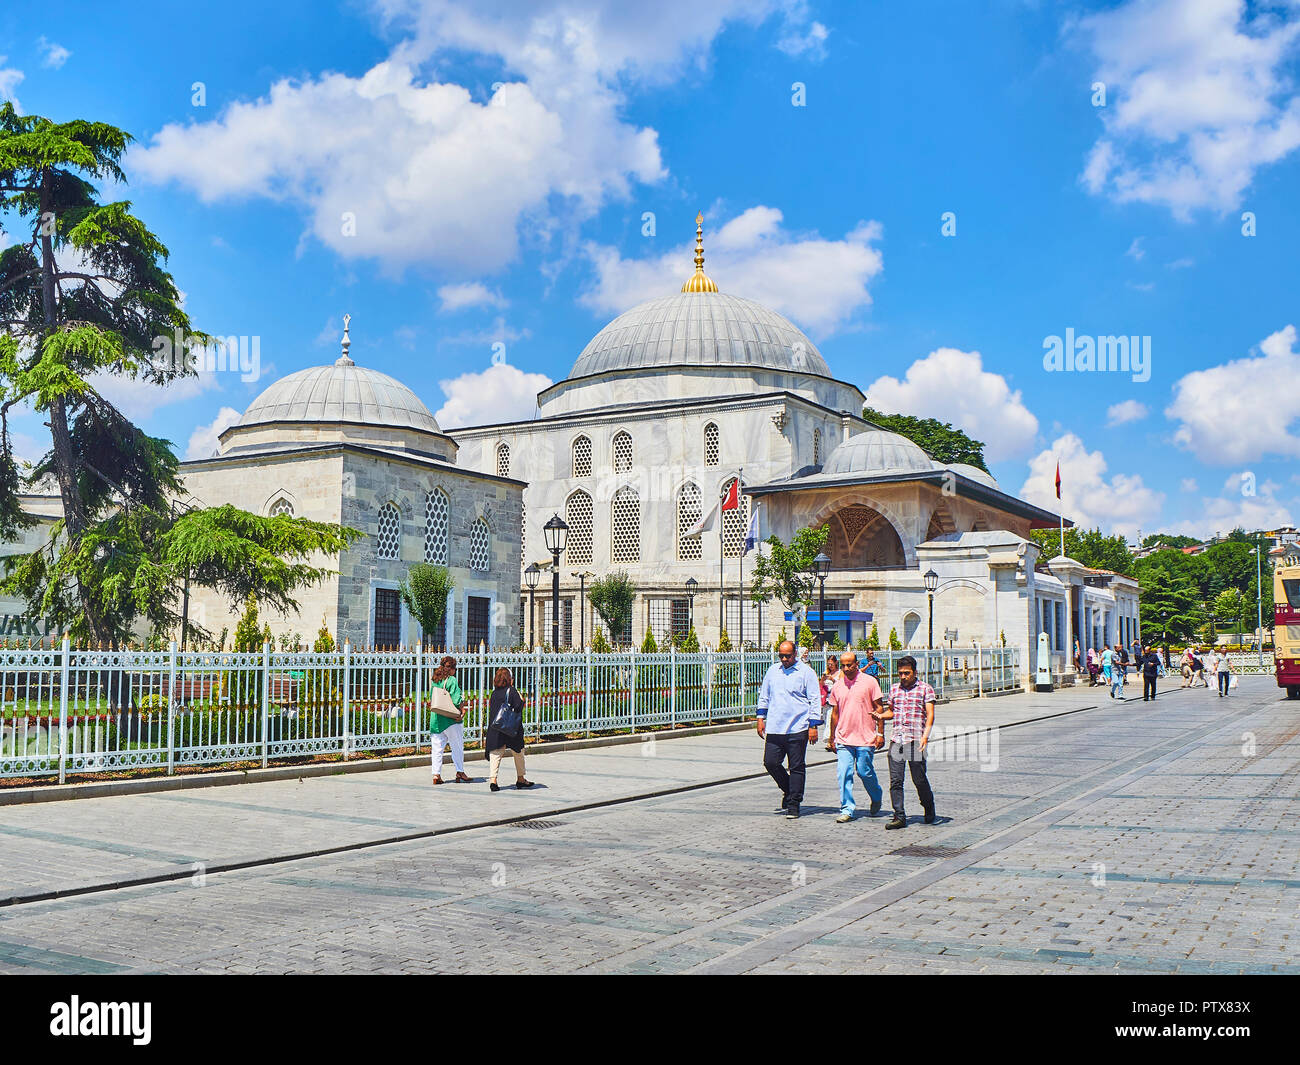 Istanbul, Turkey - July 8, 2018. Citizens walking in Sultanahmet Park, facing The Tomb of Sultan Ahmet I, on the north side of The Sultan Ahmet Mosque Stock Photo